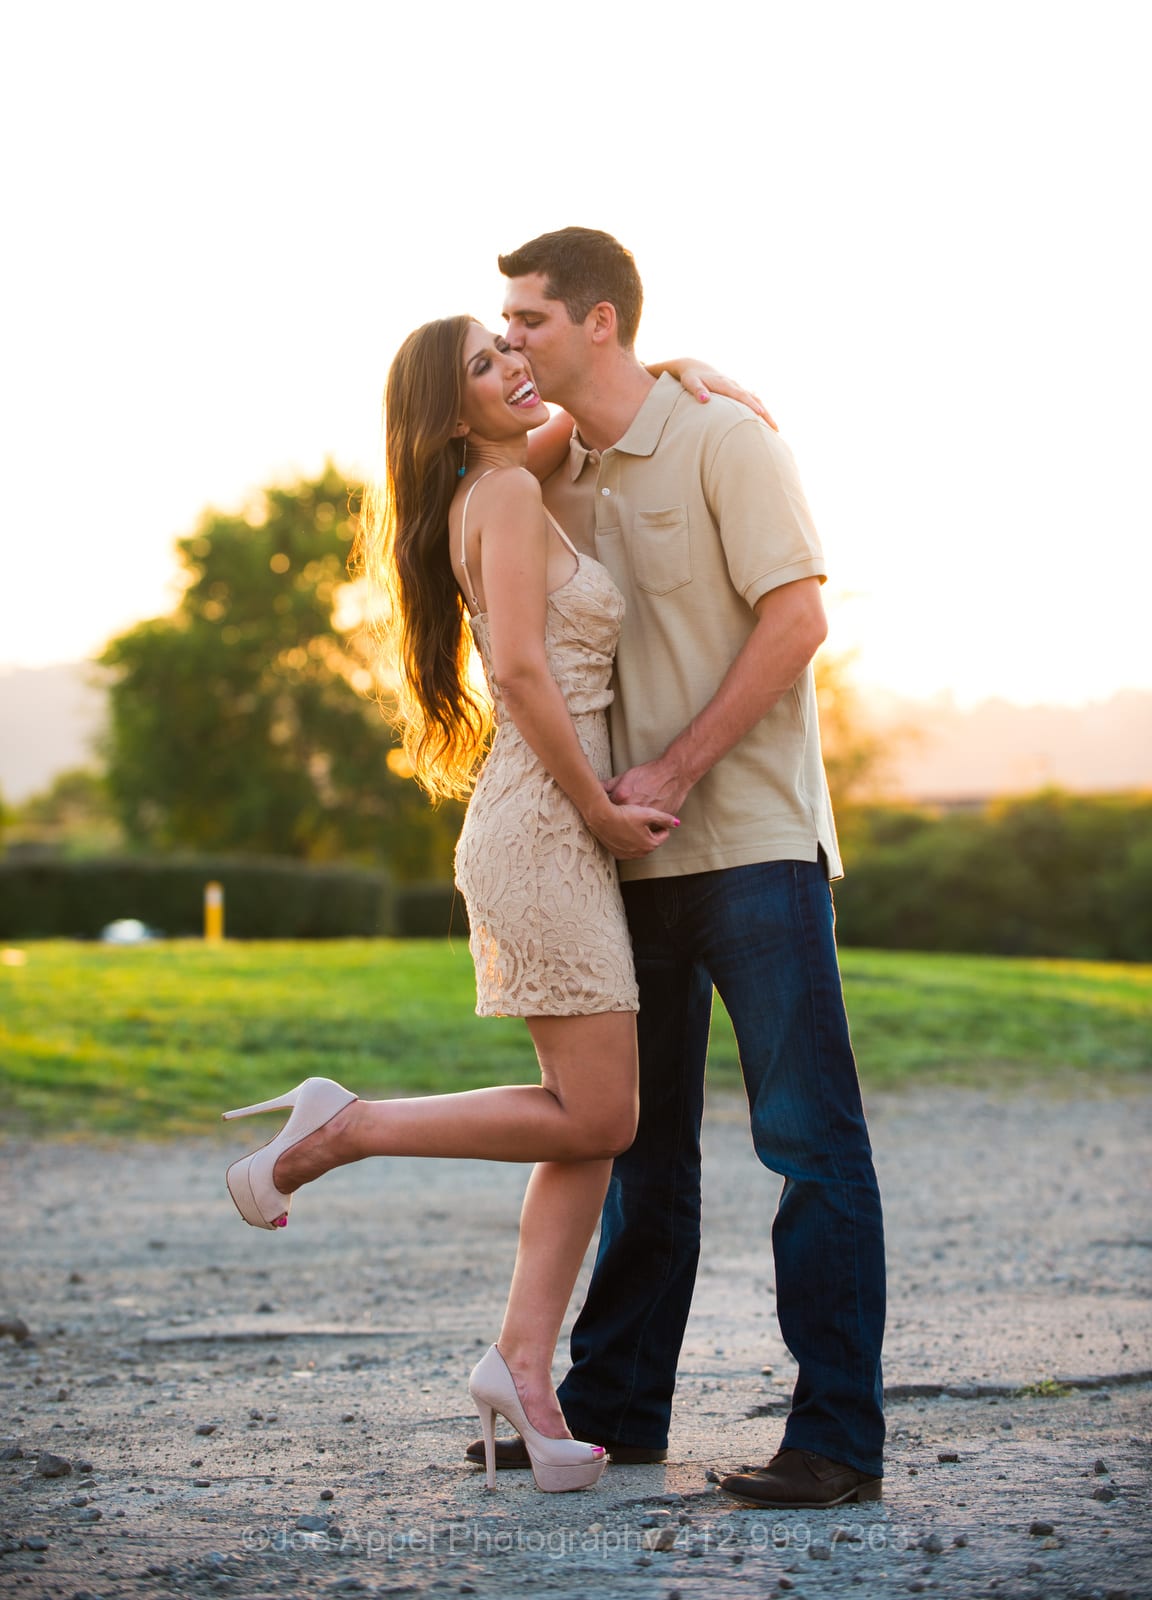 A woman in a short tan dress lifts her high heel into the air as she is held by a tall man wearing a tan shirt and blue jeans during their Pump House Engagement Photography session.